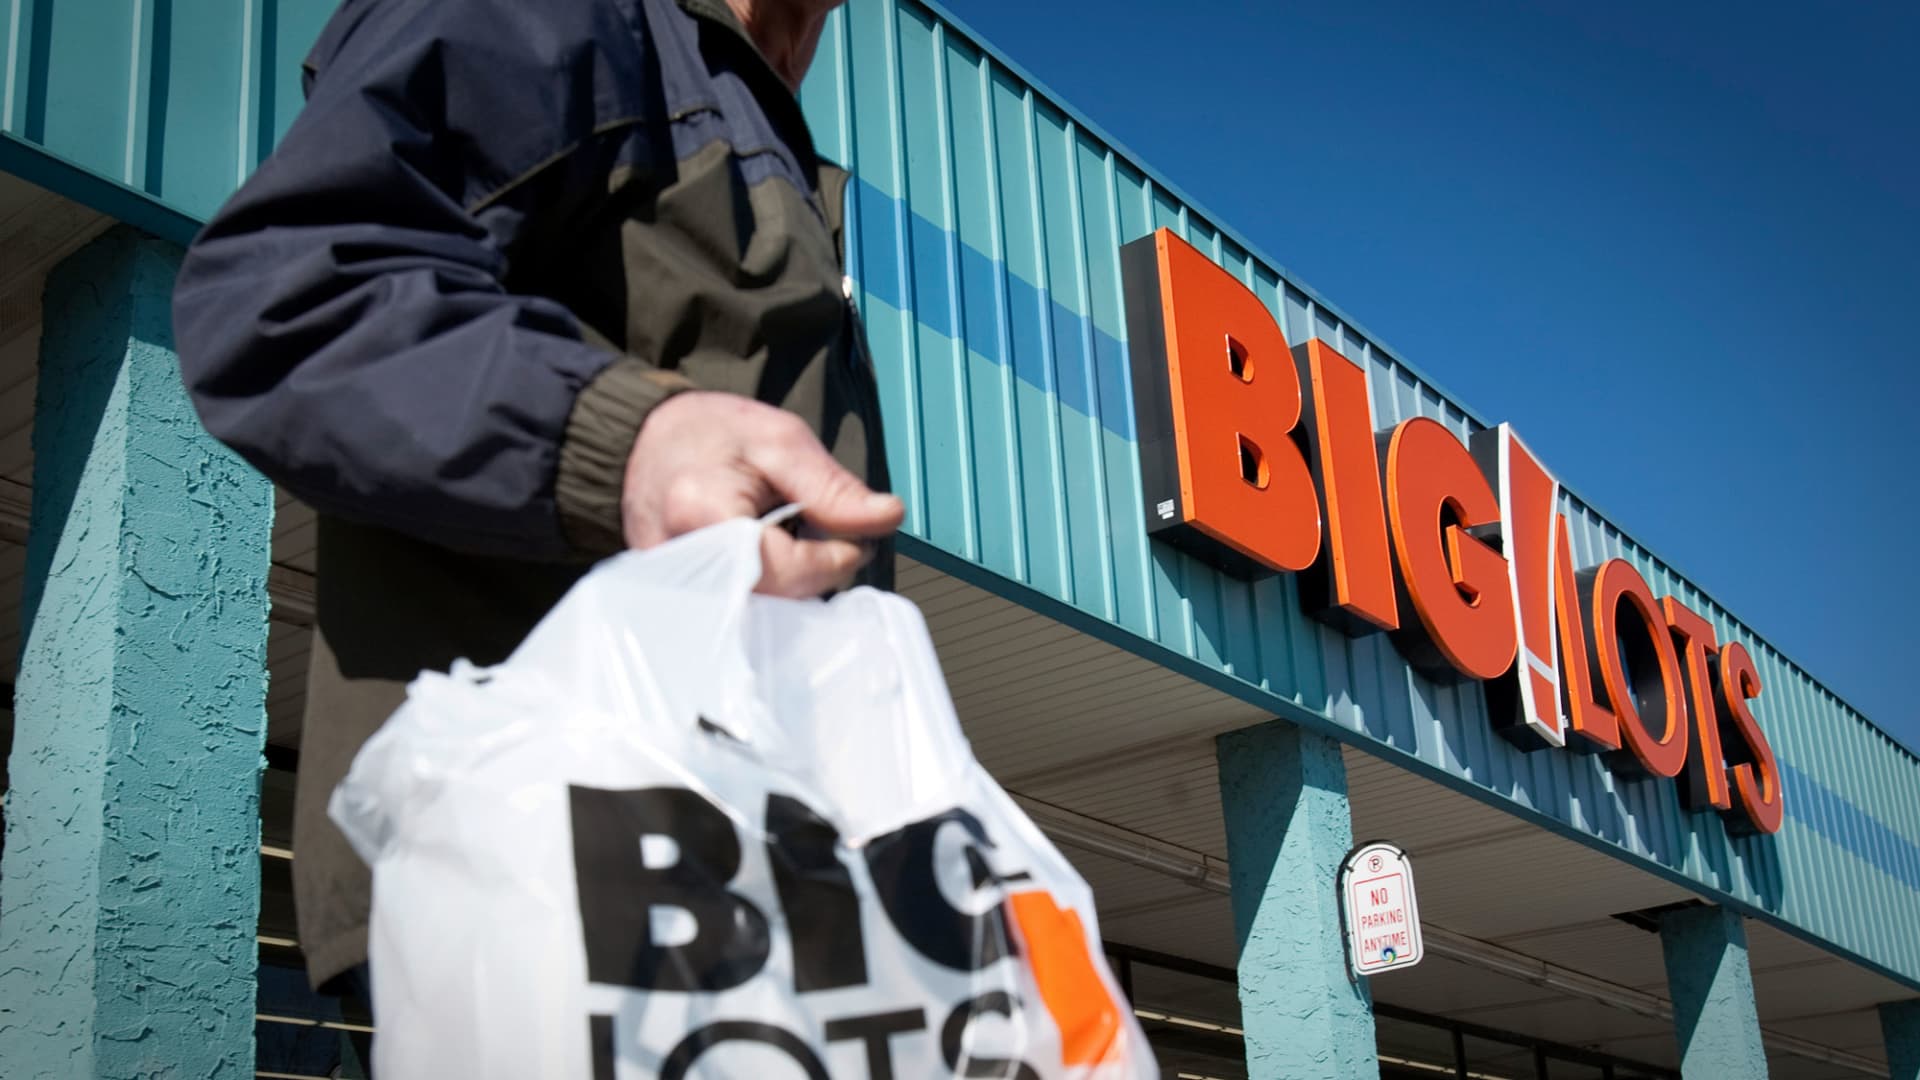 Stocks making the biggest moves midday: Big Lots, Best Buy, Nikola and Lucid